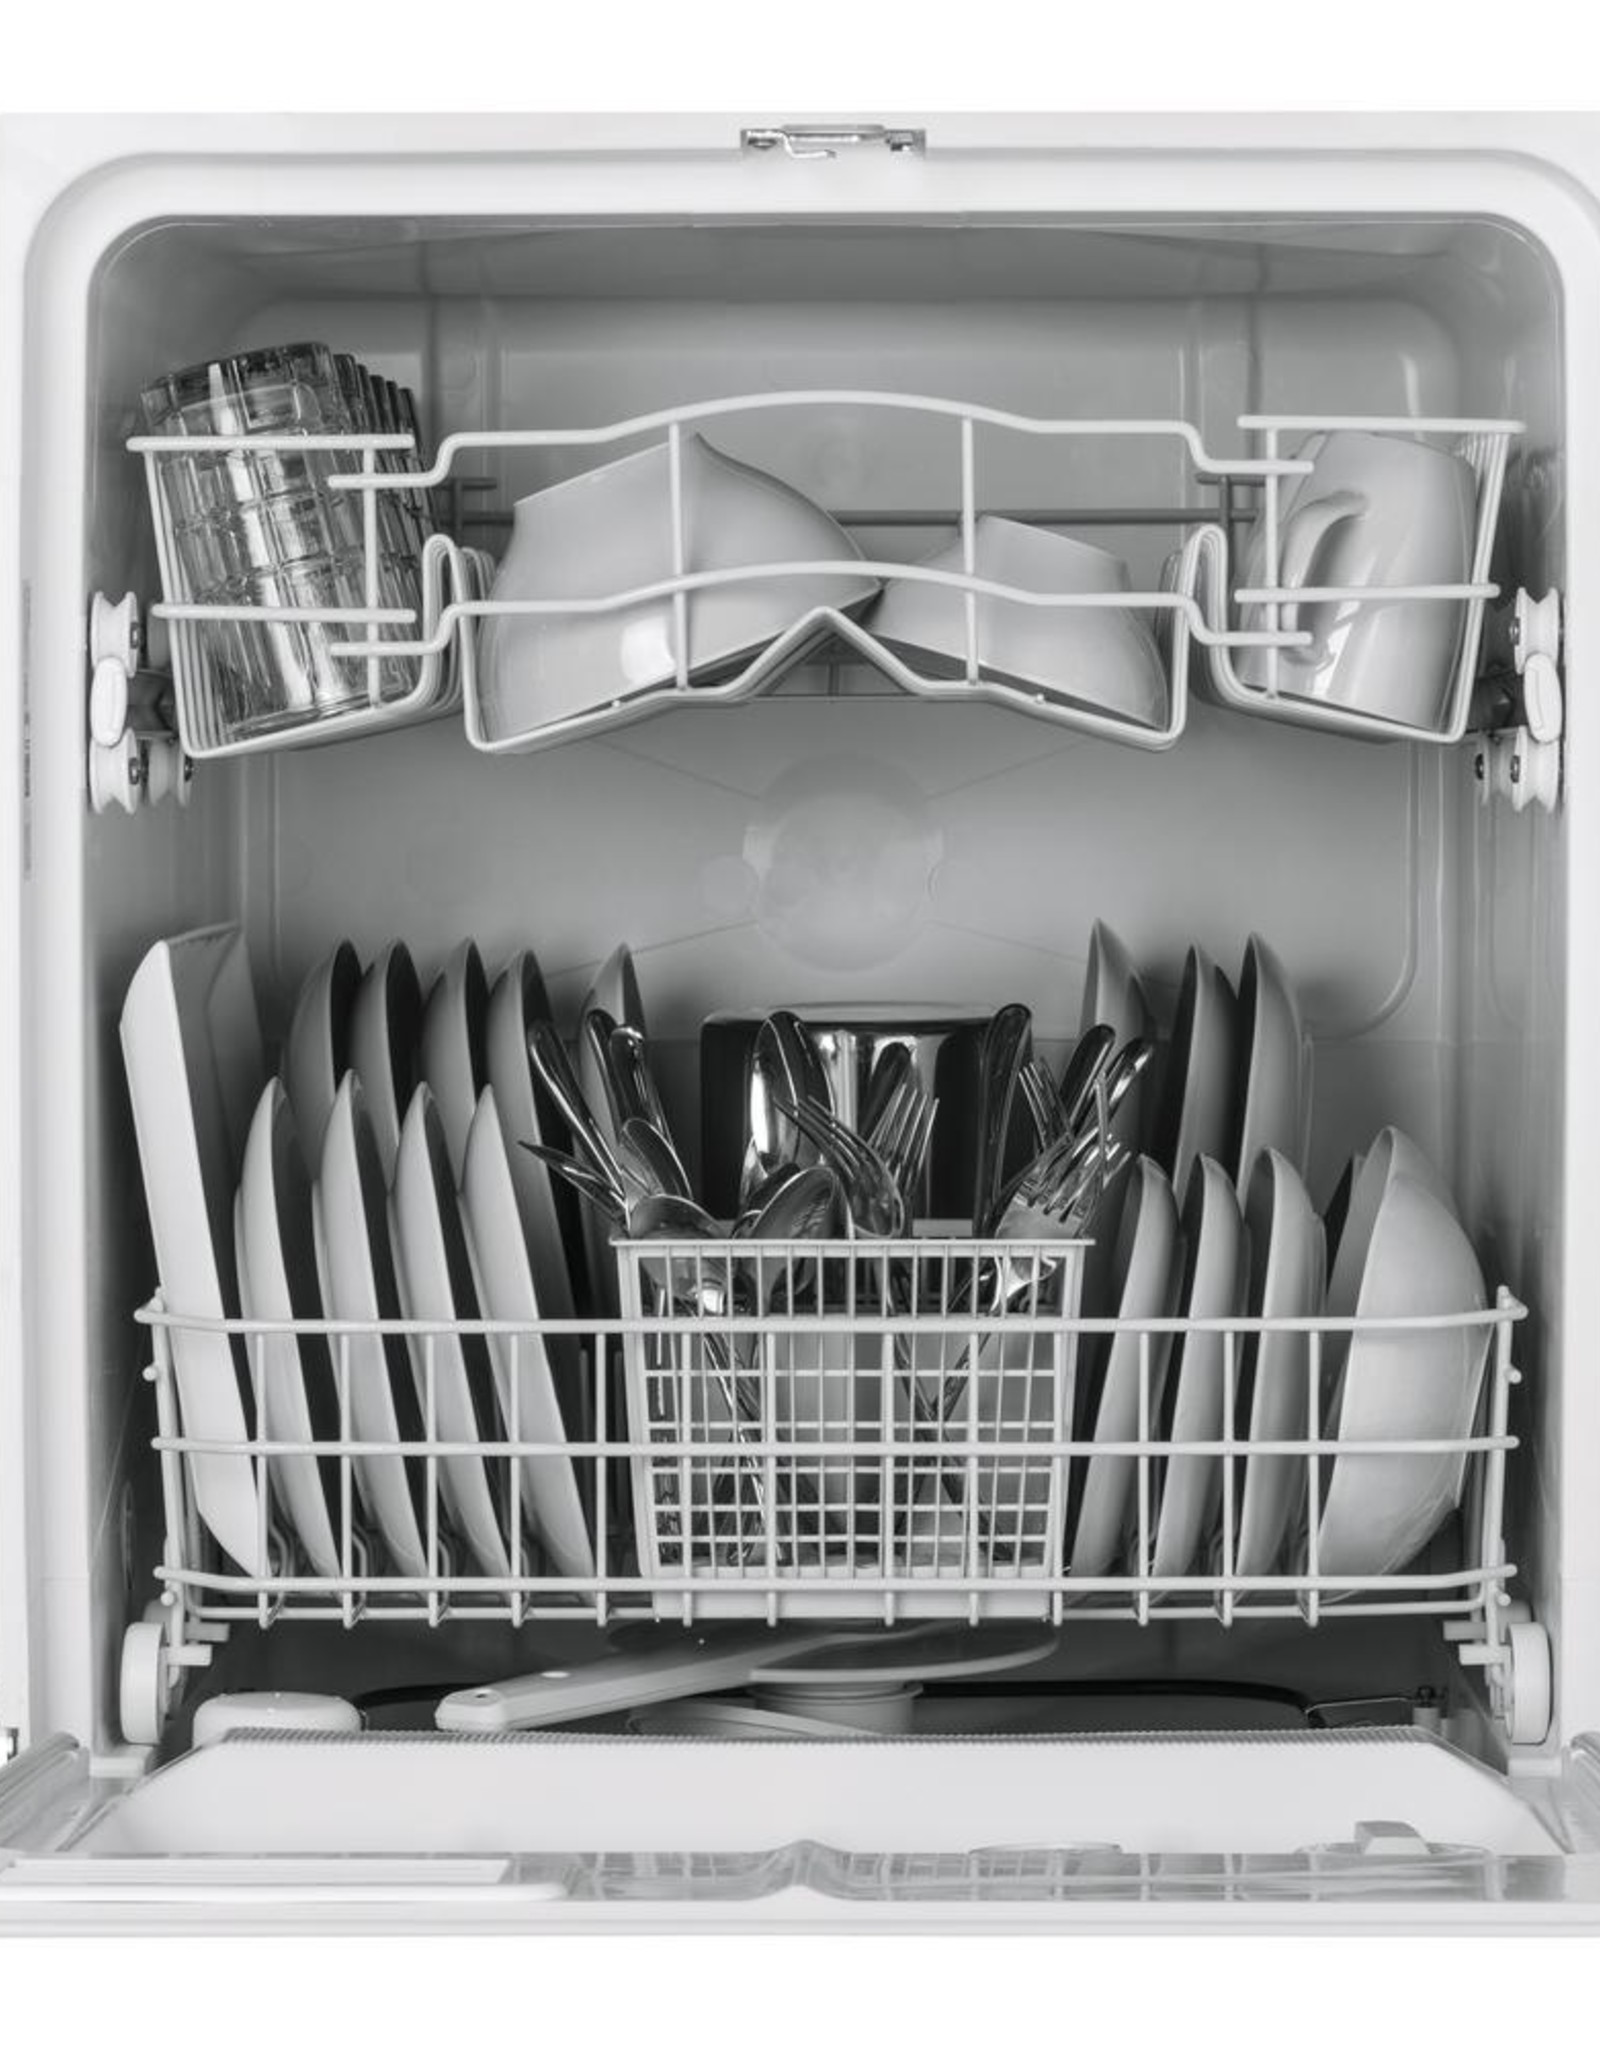 GE GE 64-Decibel and Hard Food Disposer Built-In Dishwasher (White) (Common: 24 Inch; Actual: 24-in)